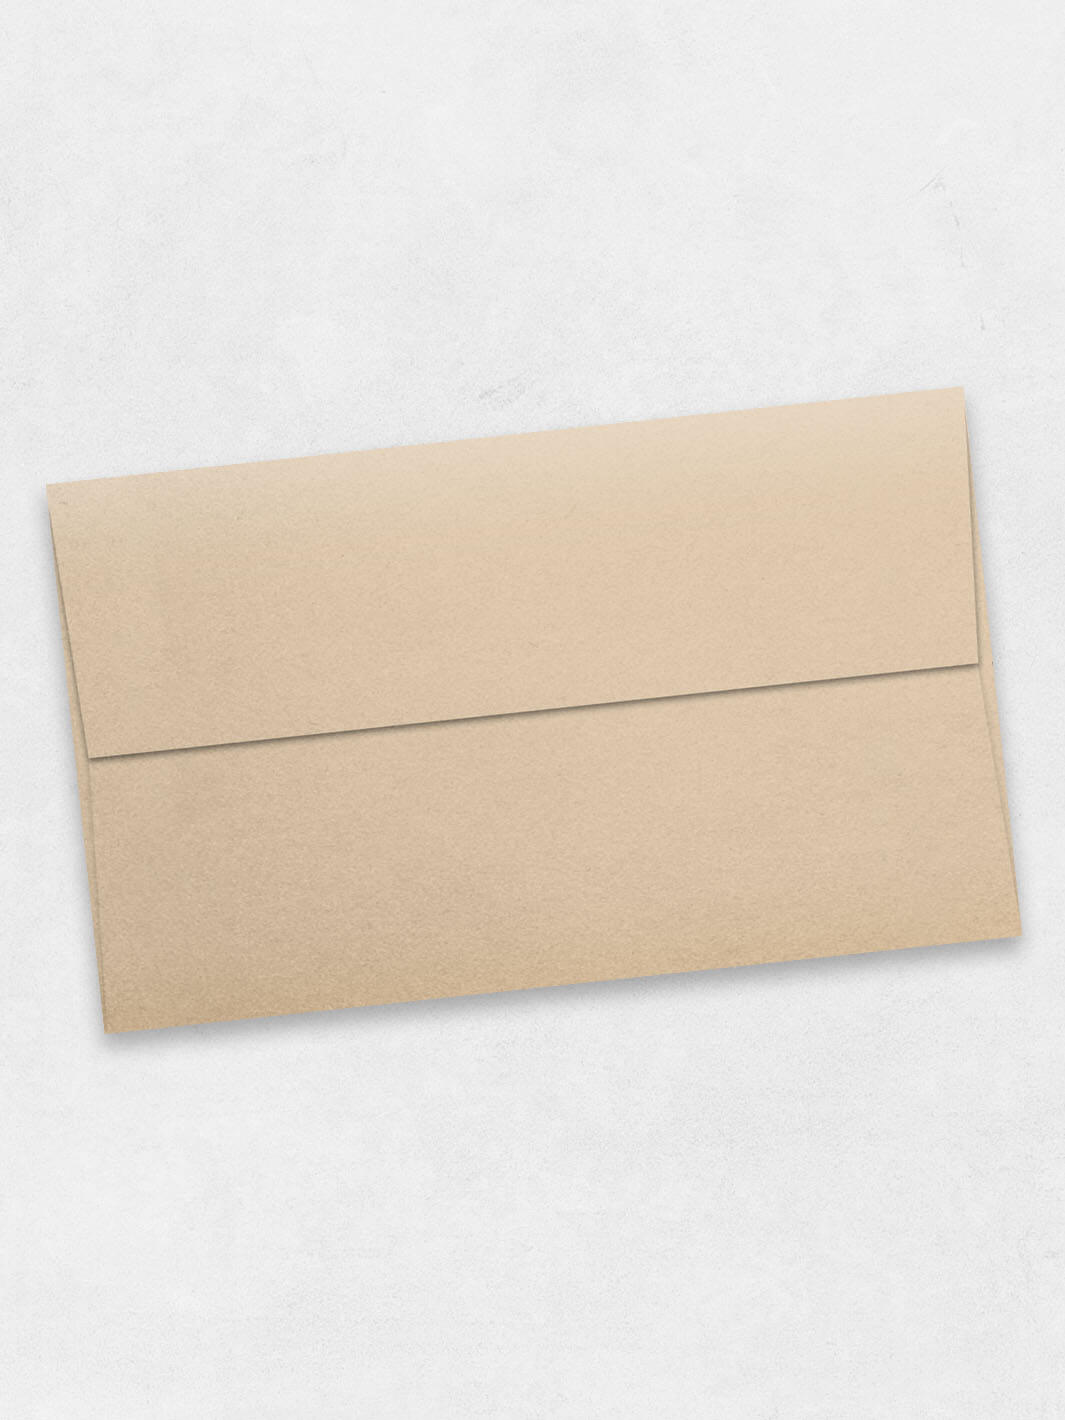 taupe metallic colored a1 envelope